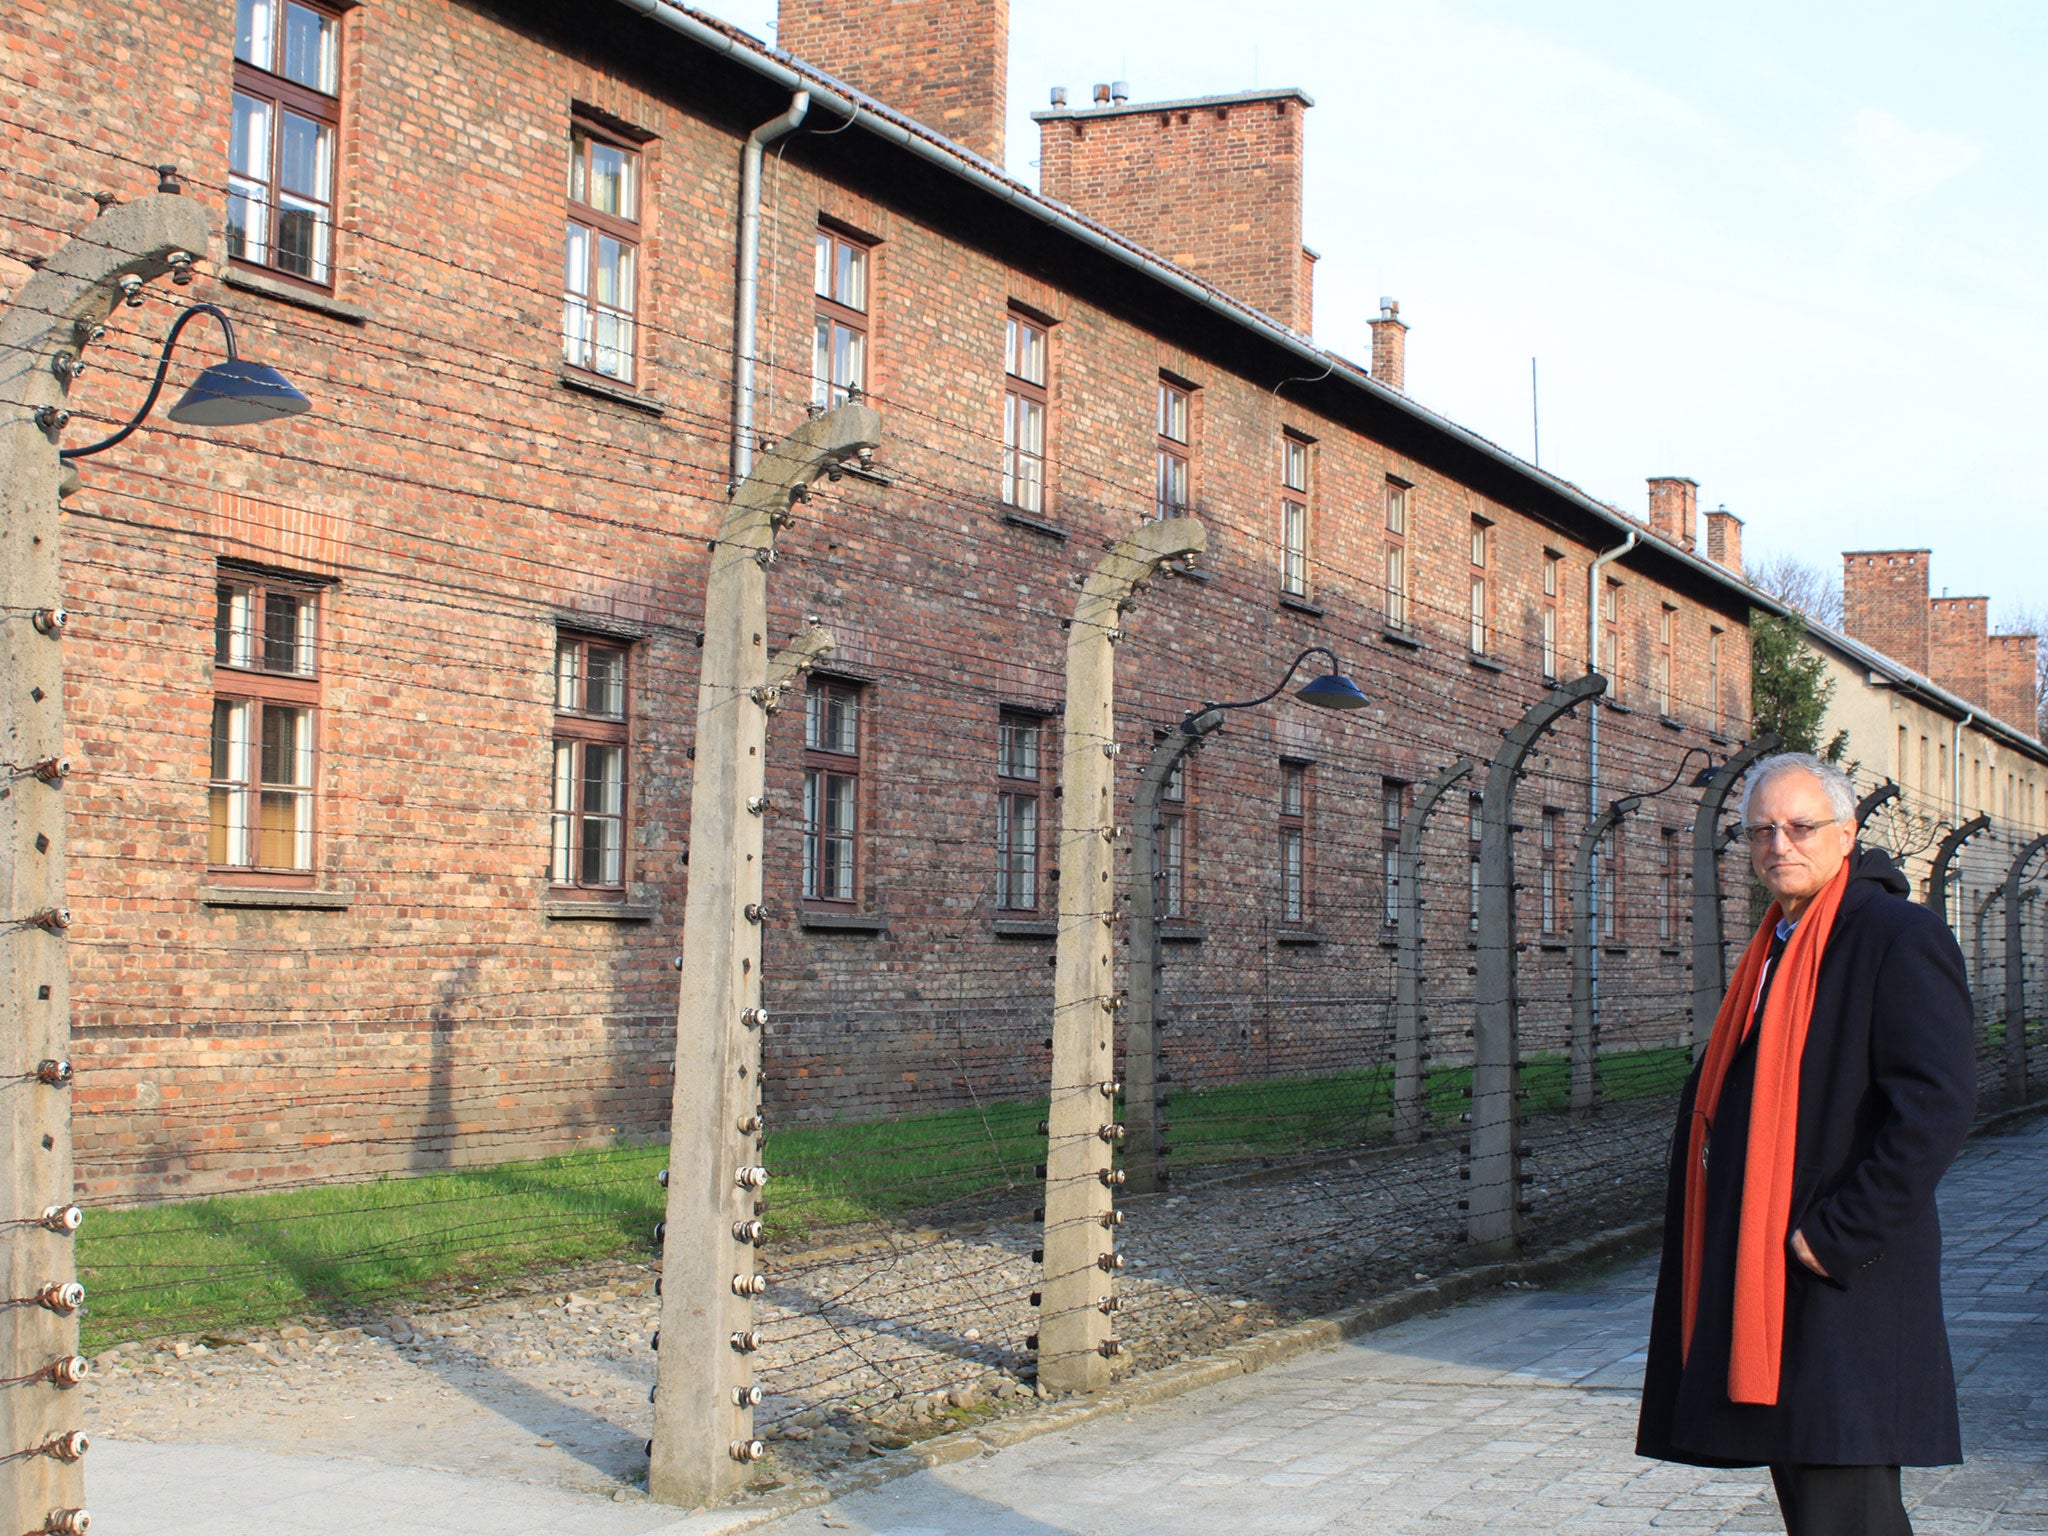 Professor Dajani took 27 students on a trip to the Nazi death camp